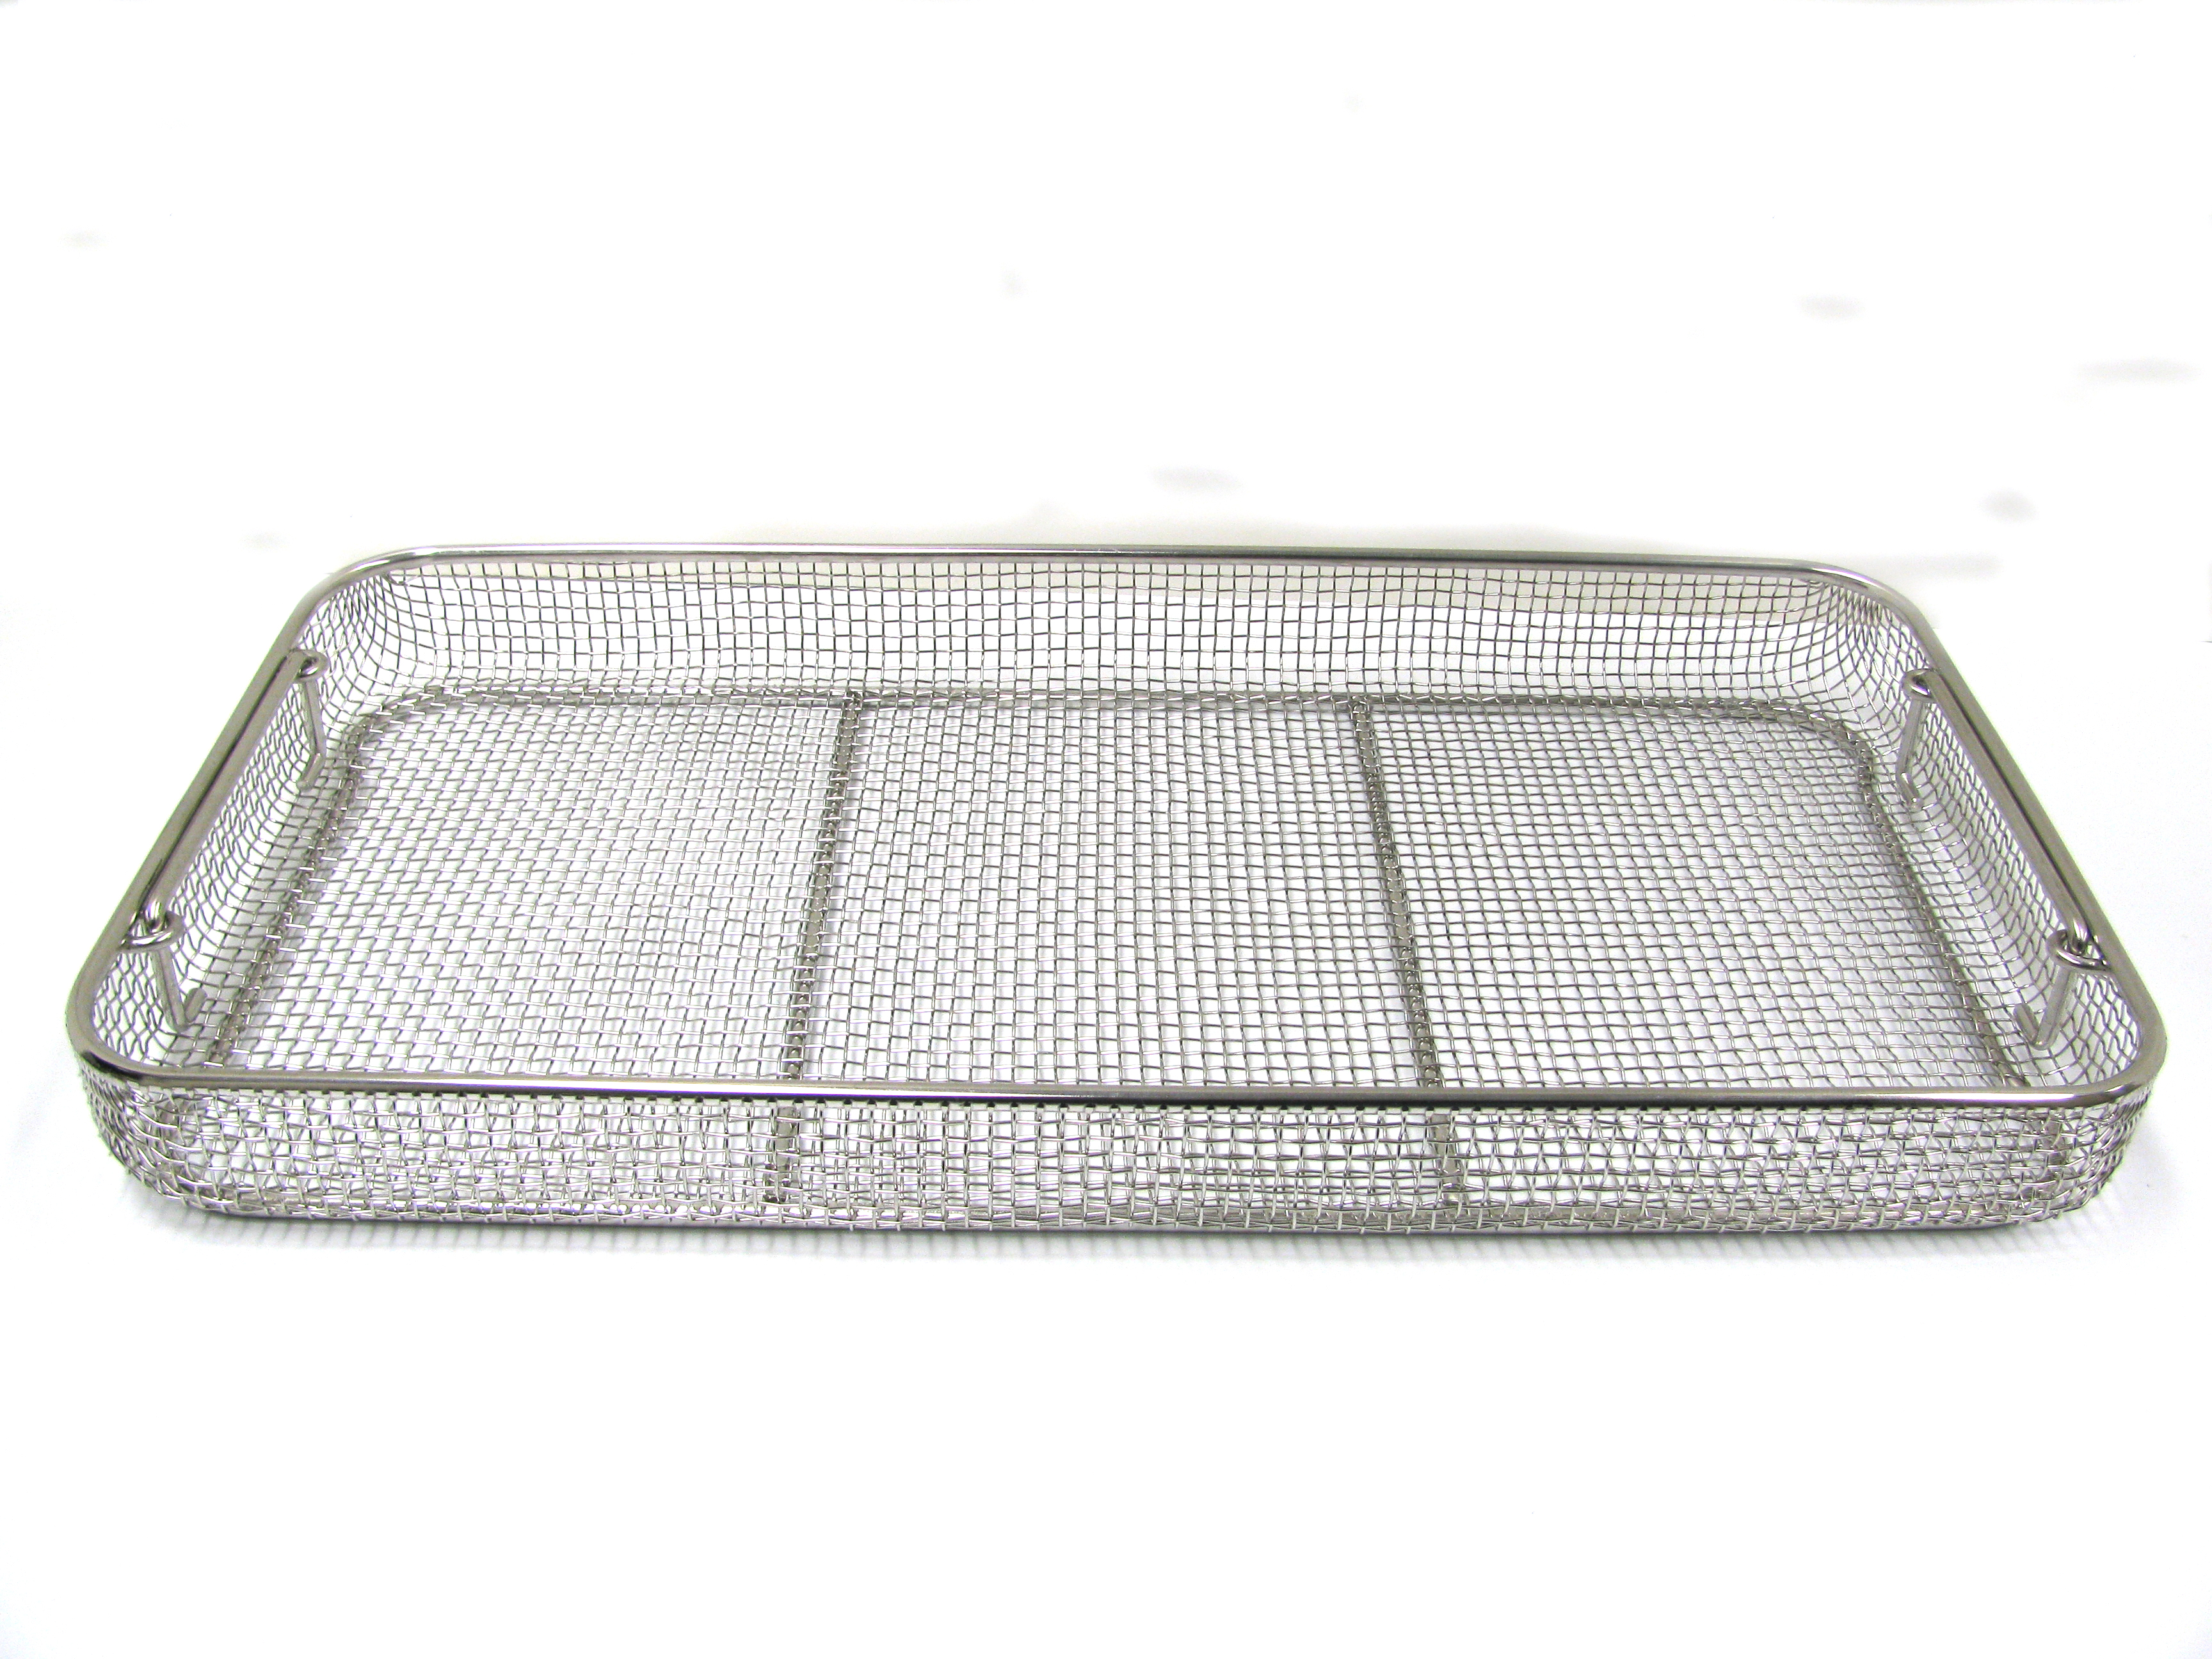 ProTech Wire Baskets